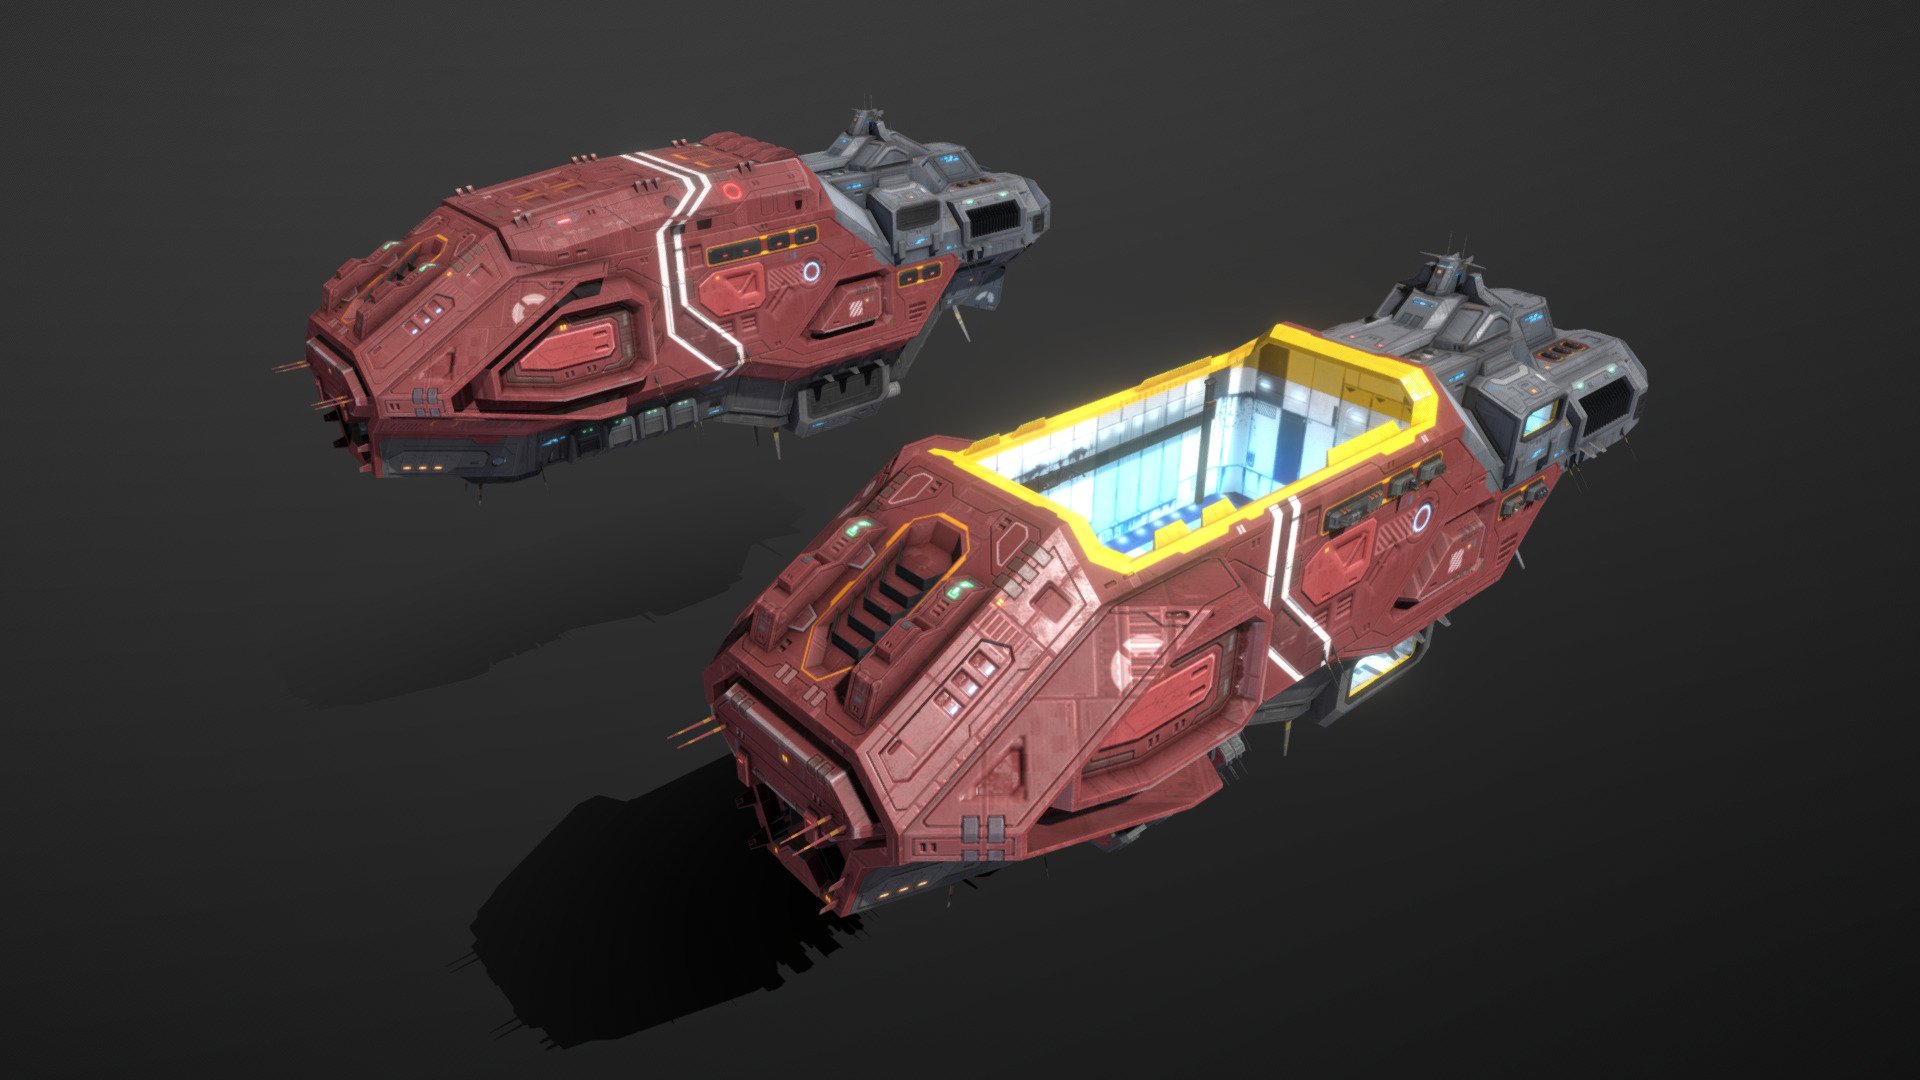 This is a model of a low-poly and game-ready scifi mobile shipyard. 

The subsystems are separate meshes and can be changed.

The model comes with several differently colored texture sets. The PSD file with intact layers is included.

Please note: The textures in the Sketchfab viewer have a reduced resolution to improve Sketchfab loading speed.

If you have bought this model please make sure to download the “additional file”.  It contains FBX and OBJ meshes, full resolution textures and the source PSDs with intact layers. The meshes are separate 3d model